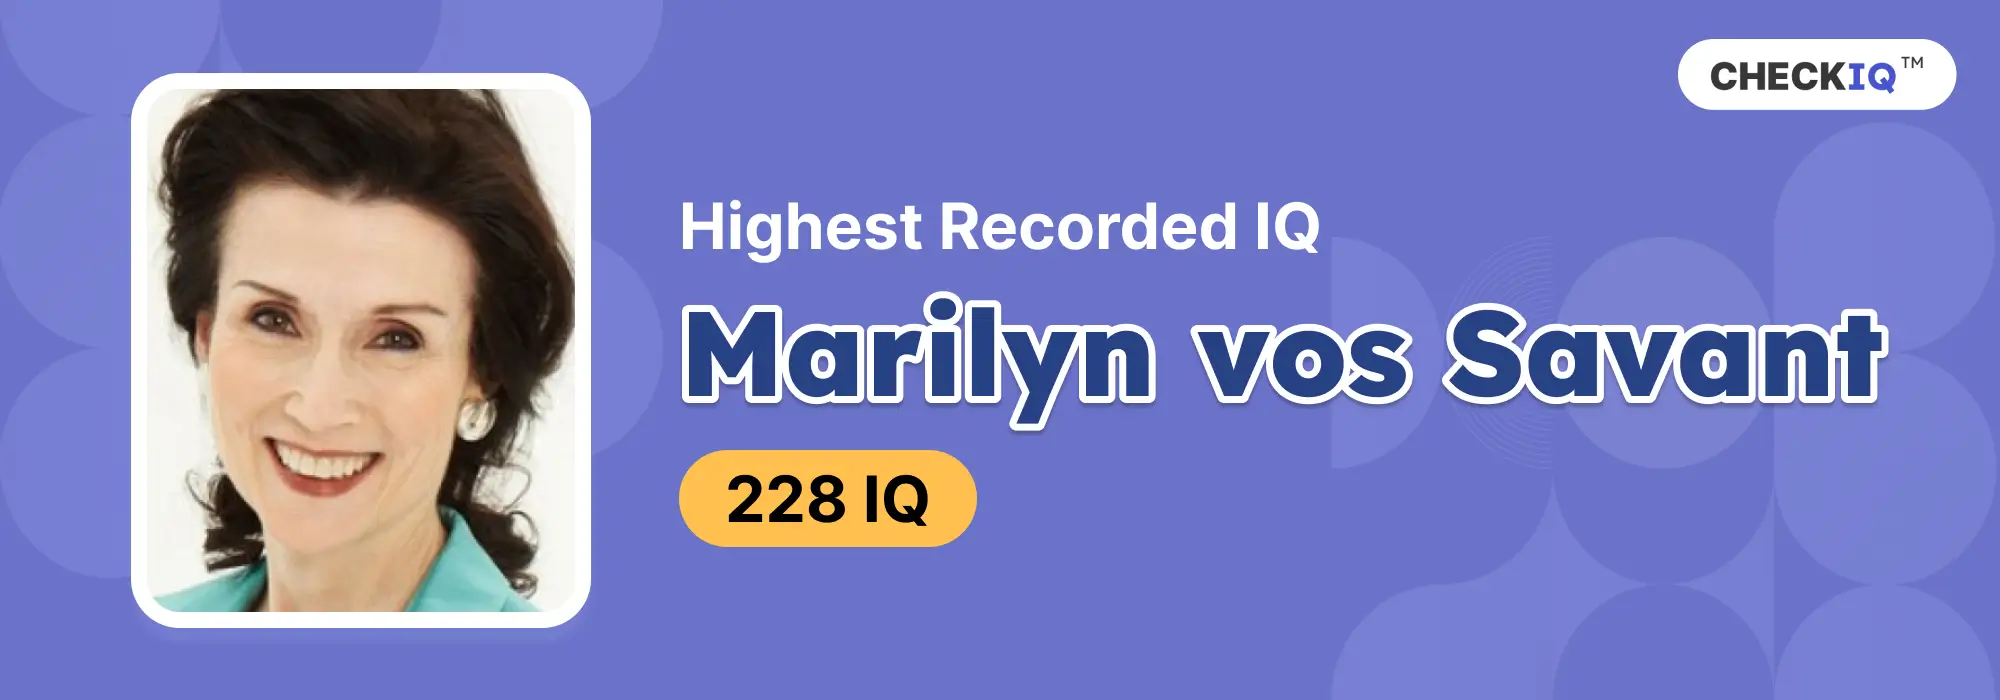 Highest recorded IQ in the world: Marilyn vos Savant with her 228